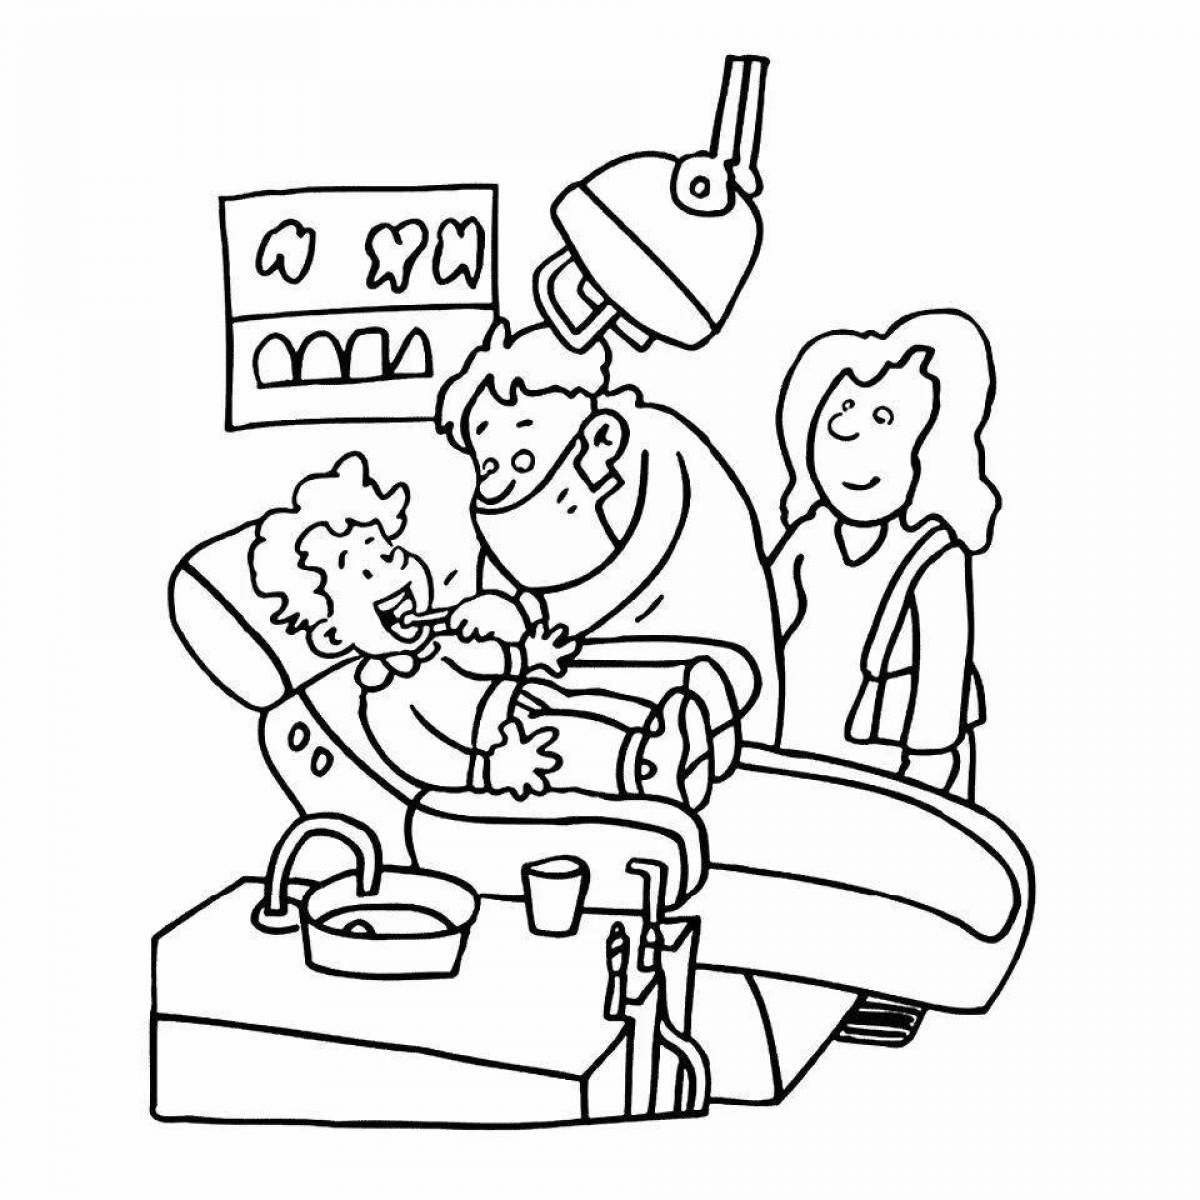 Dentistry coloring book with color filling